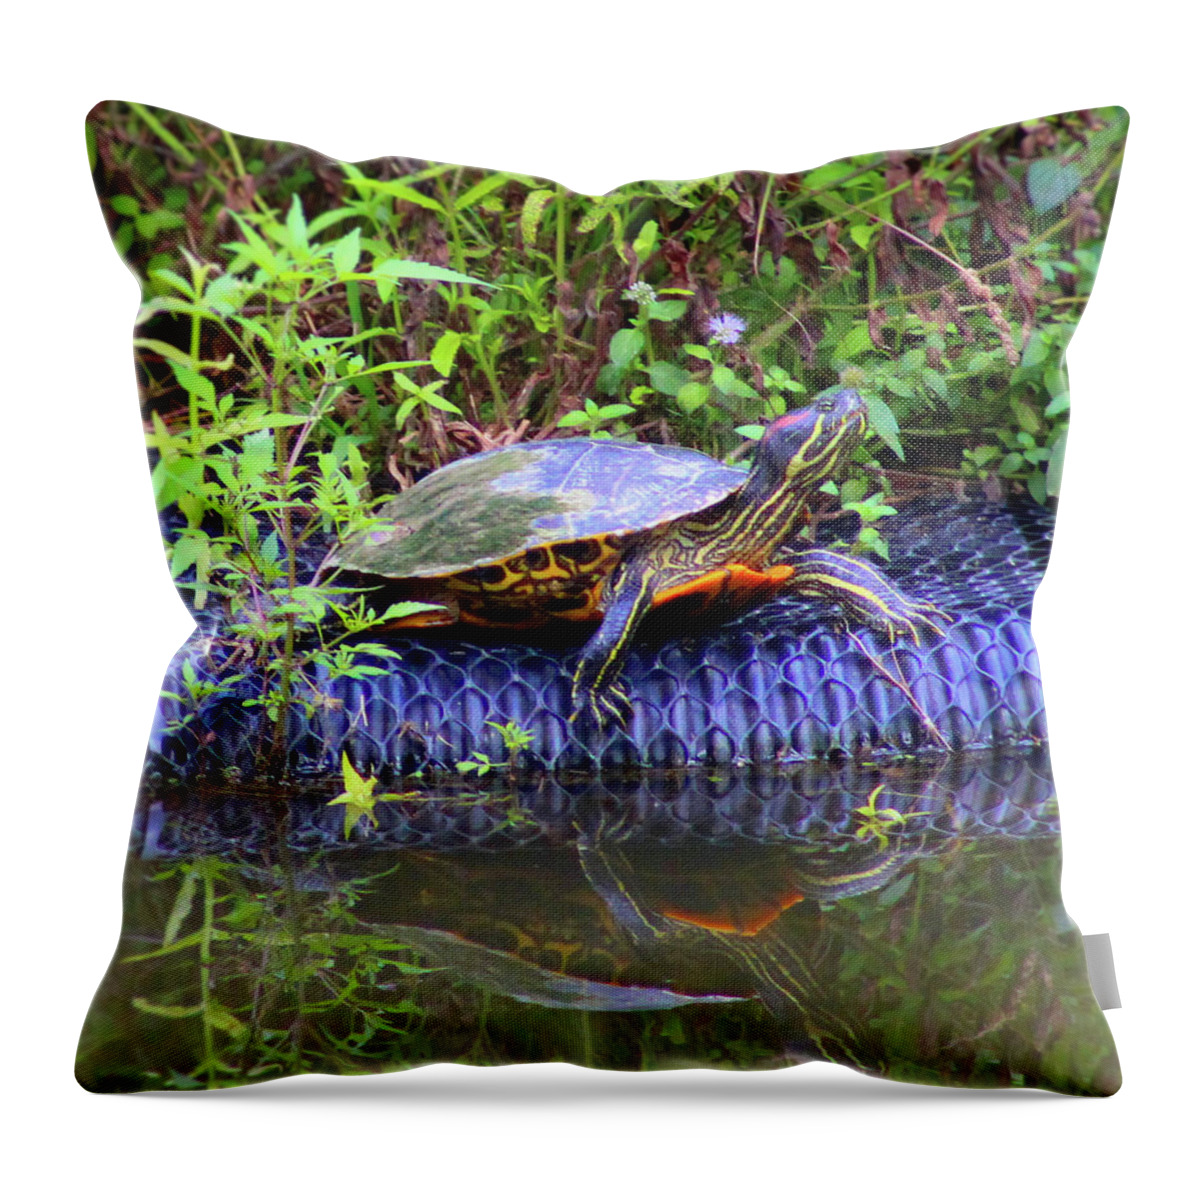 Turtle Throw Pillow featuring the photograph Turtle Reflection by Christopher Reed